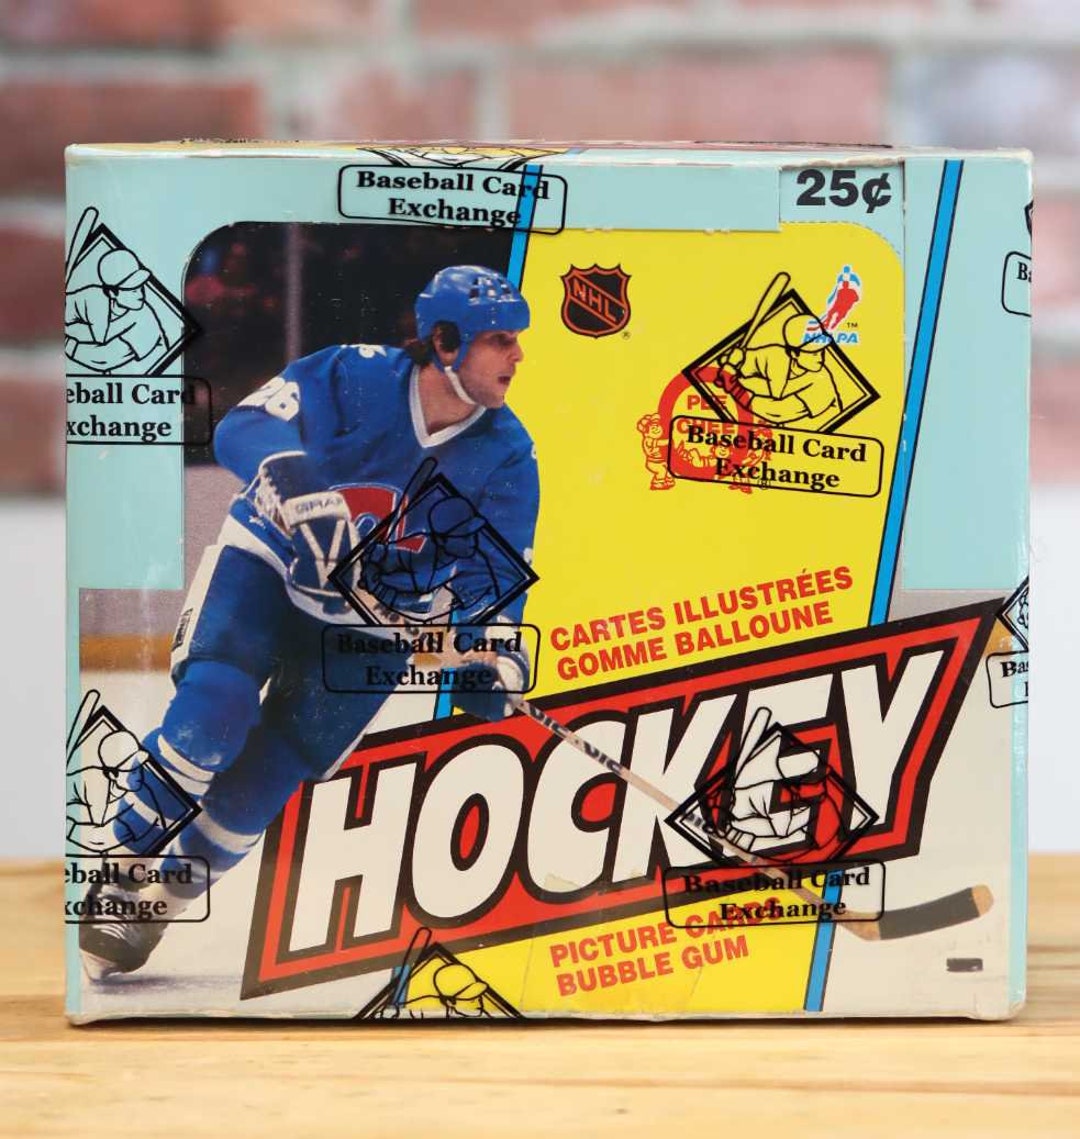 Vintage Bubble Gum on Instagram: While hockey owns the mullet, I